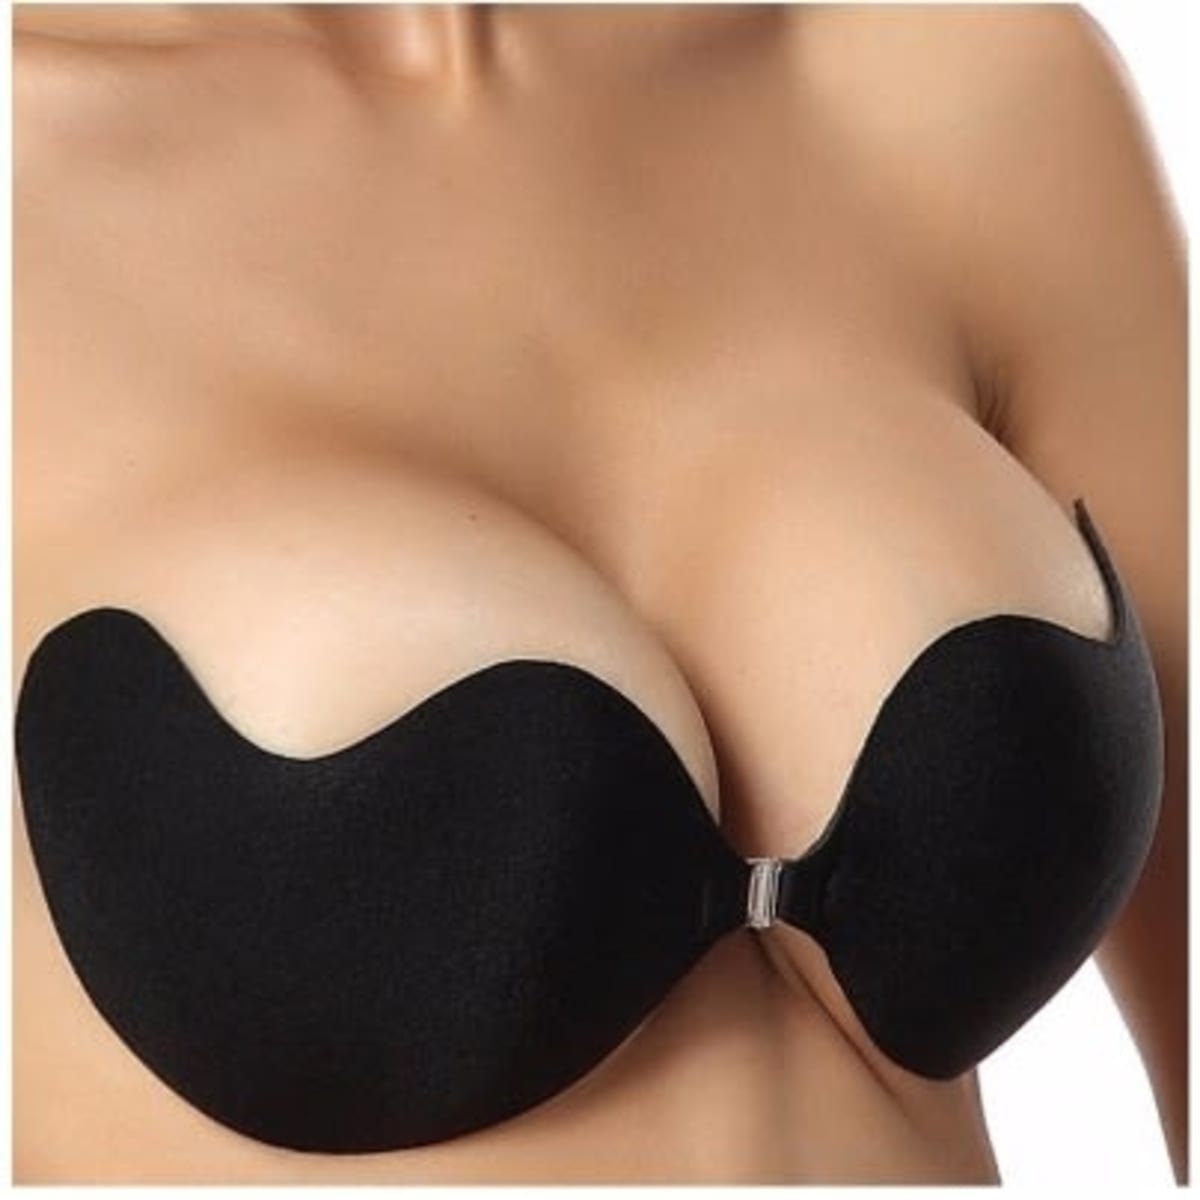 Strapless Backless Invisible Self Adhesive Bra - Black